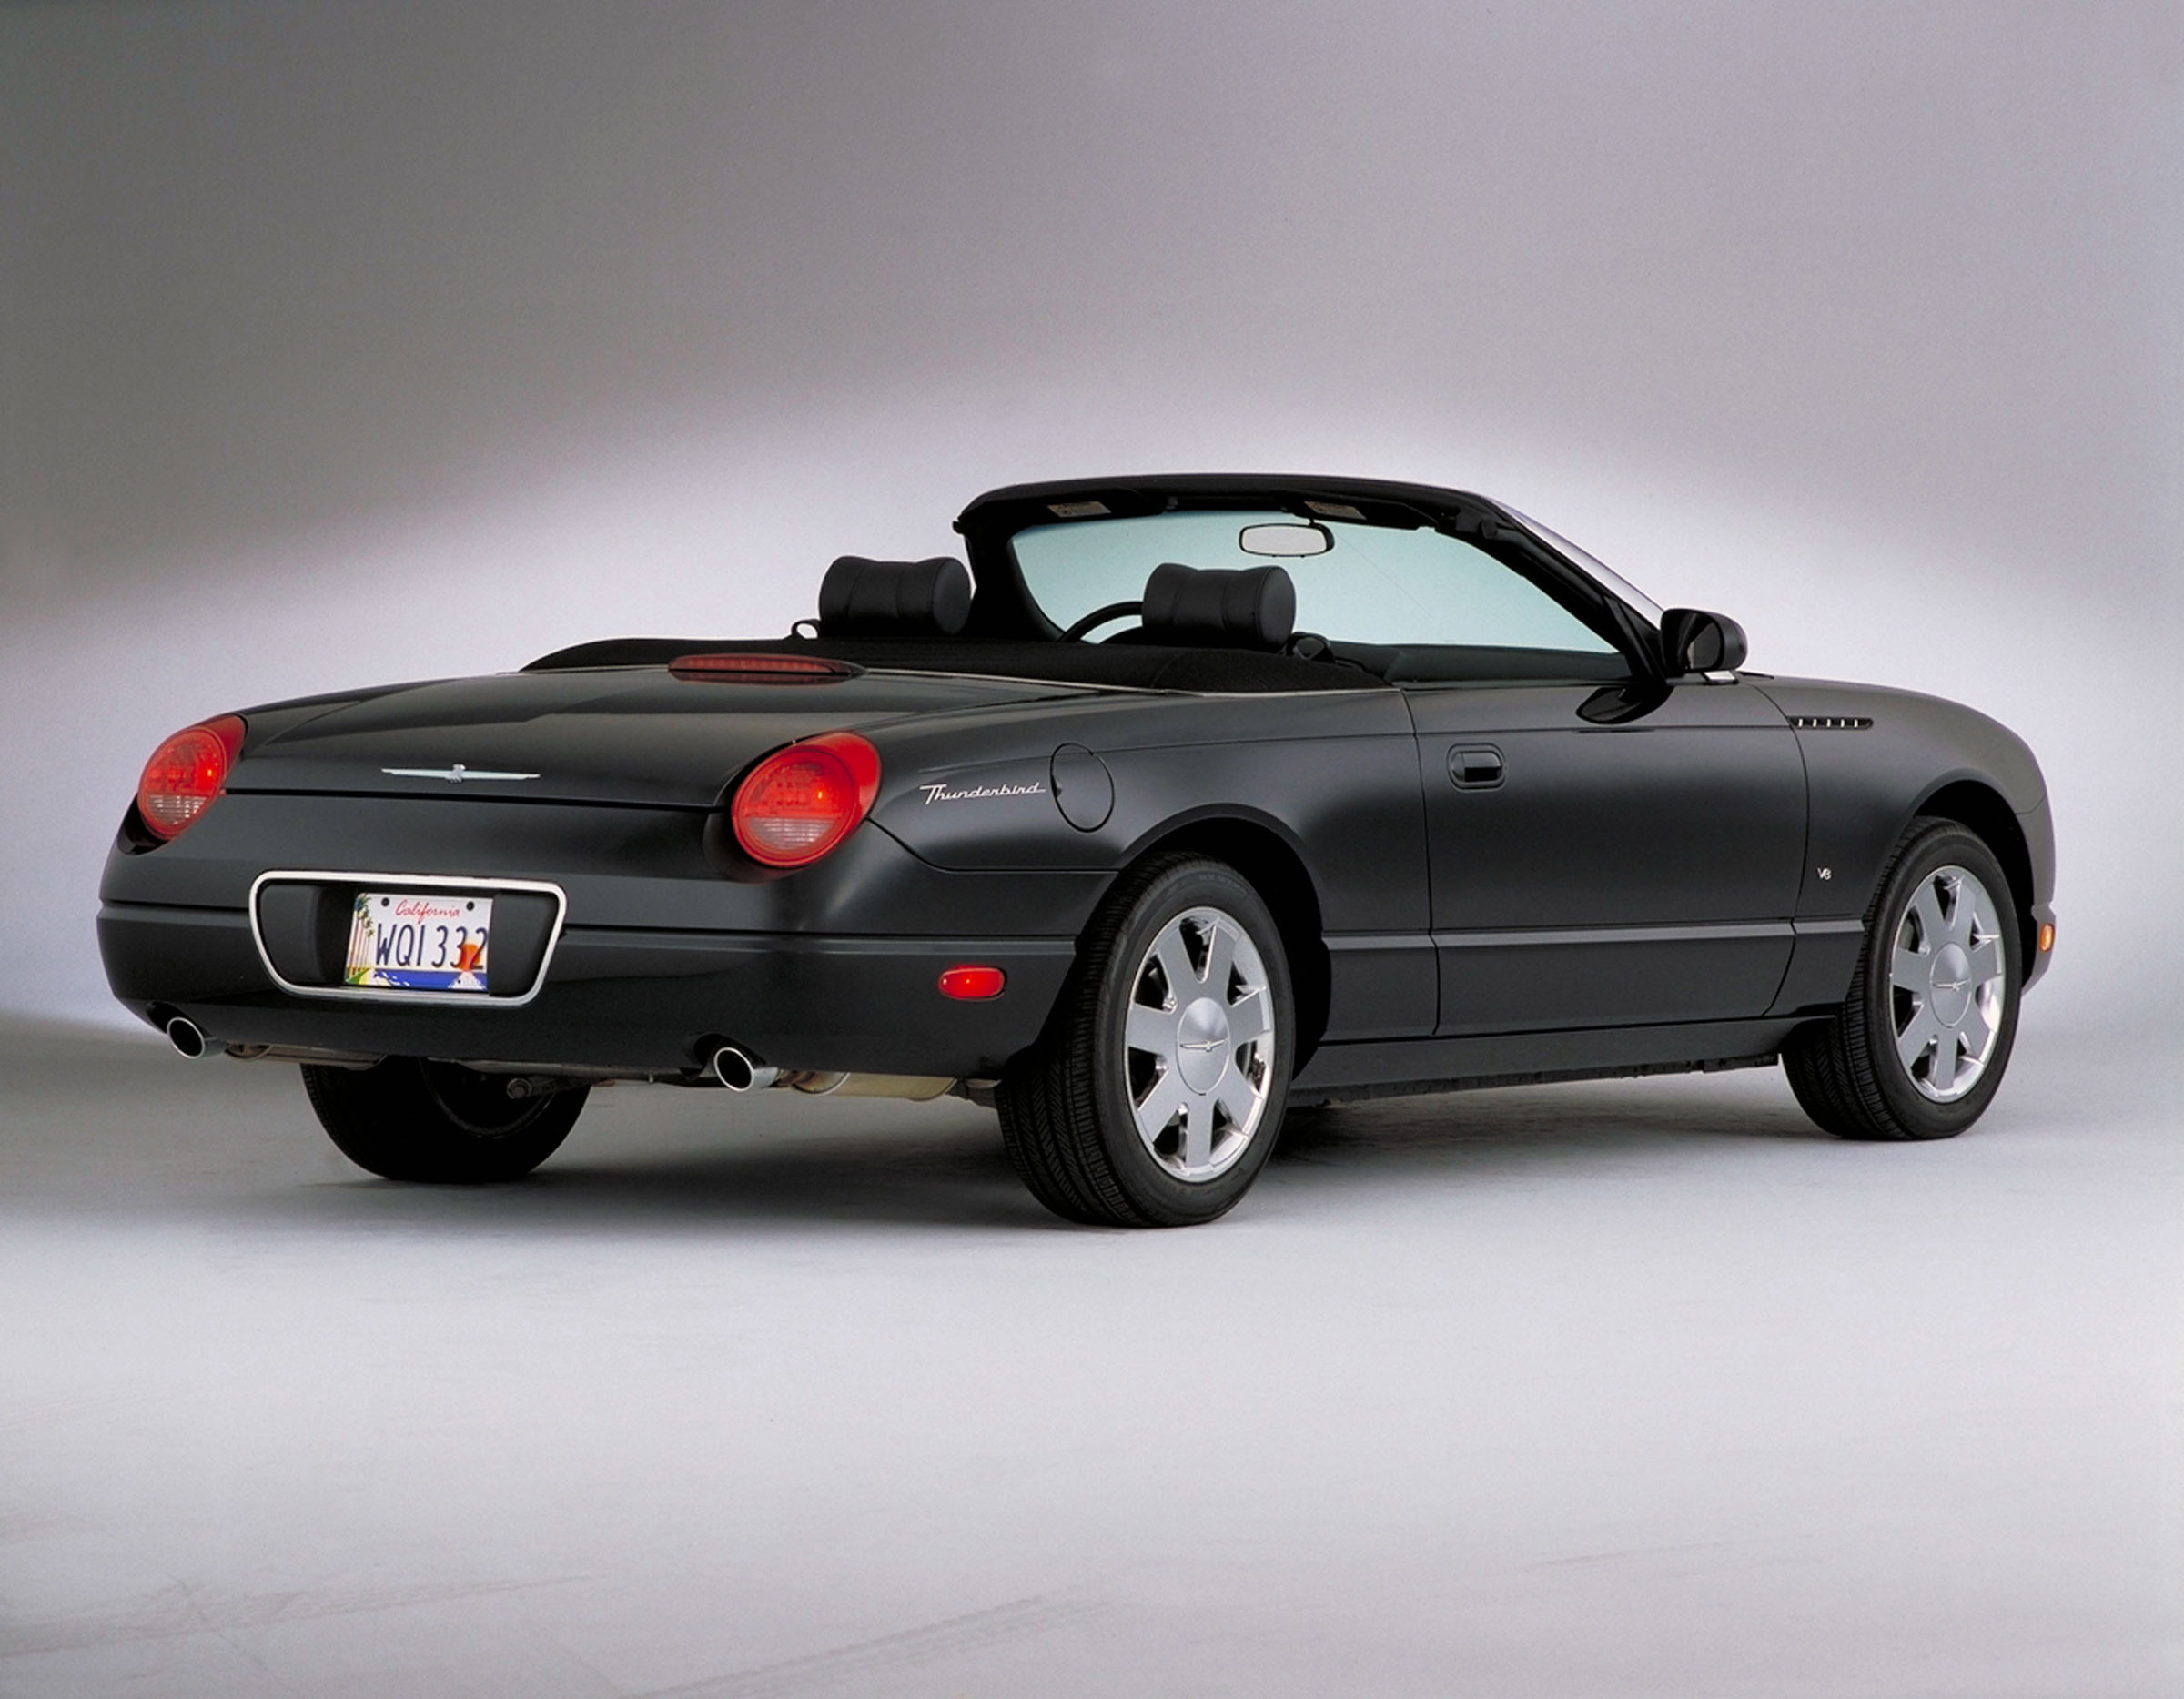 2003 Ford thunderbird performance review